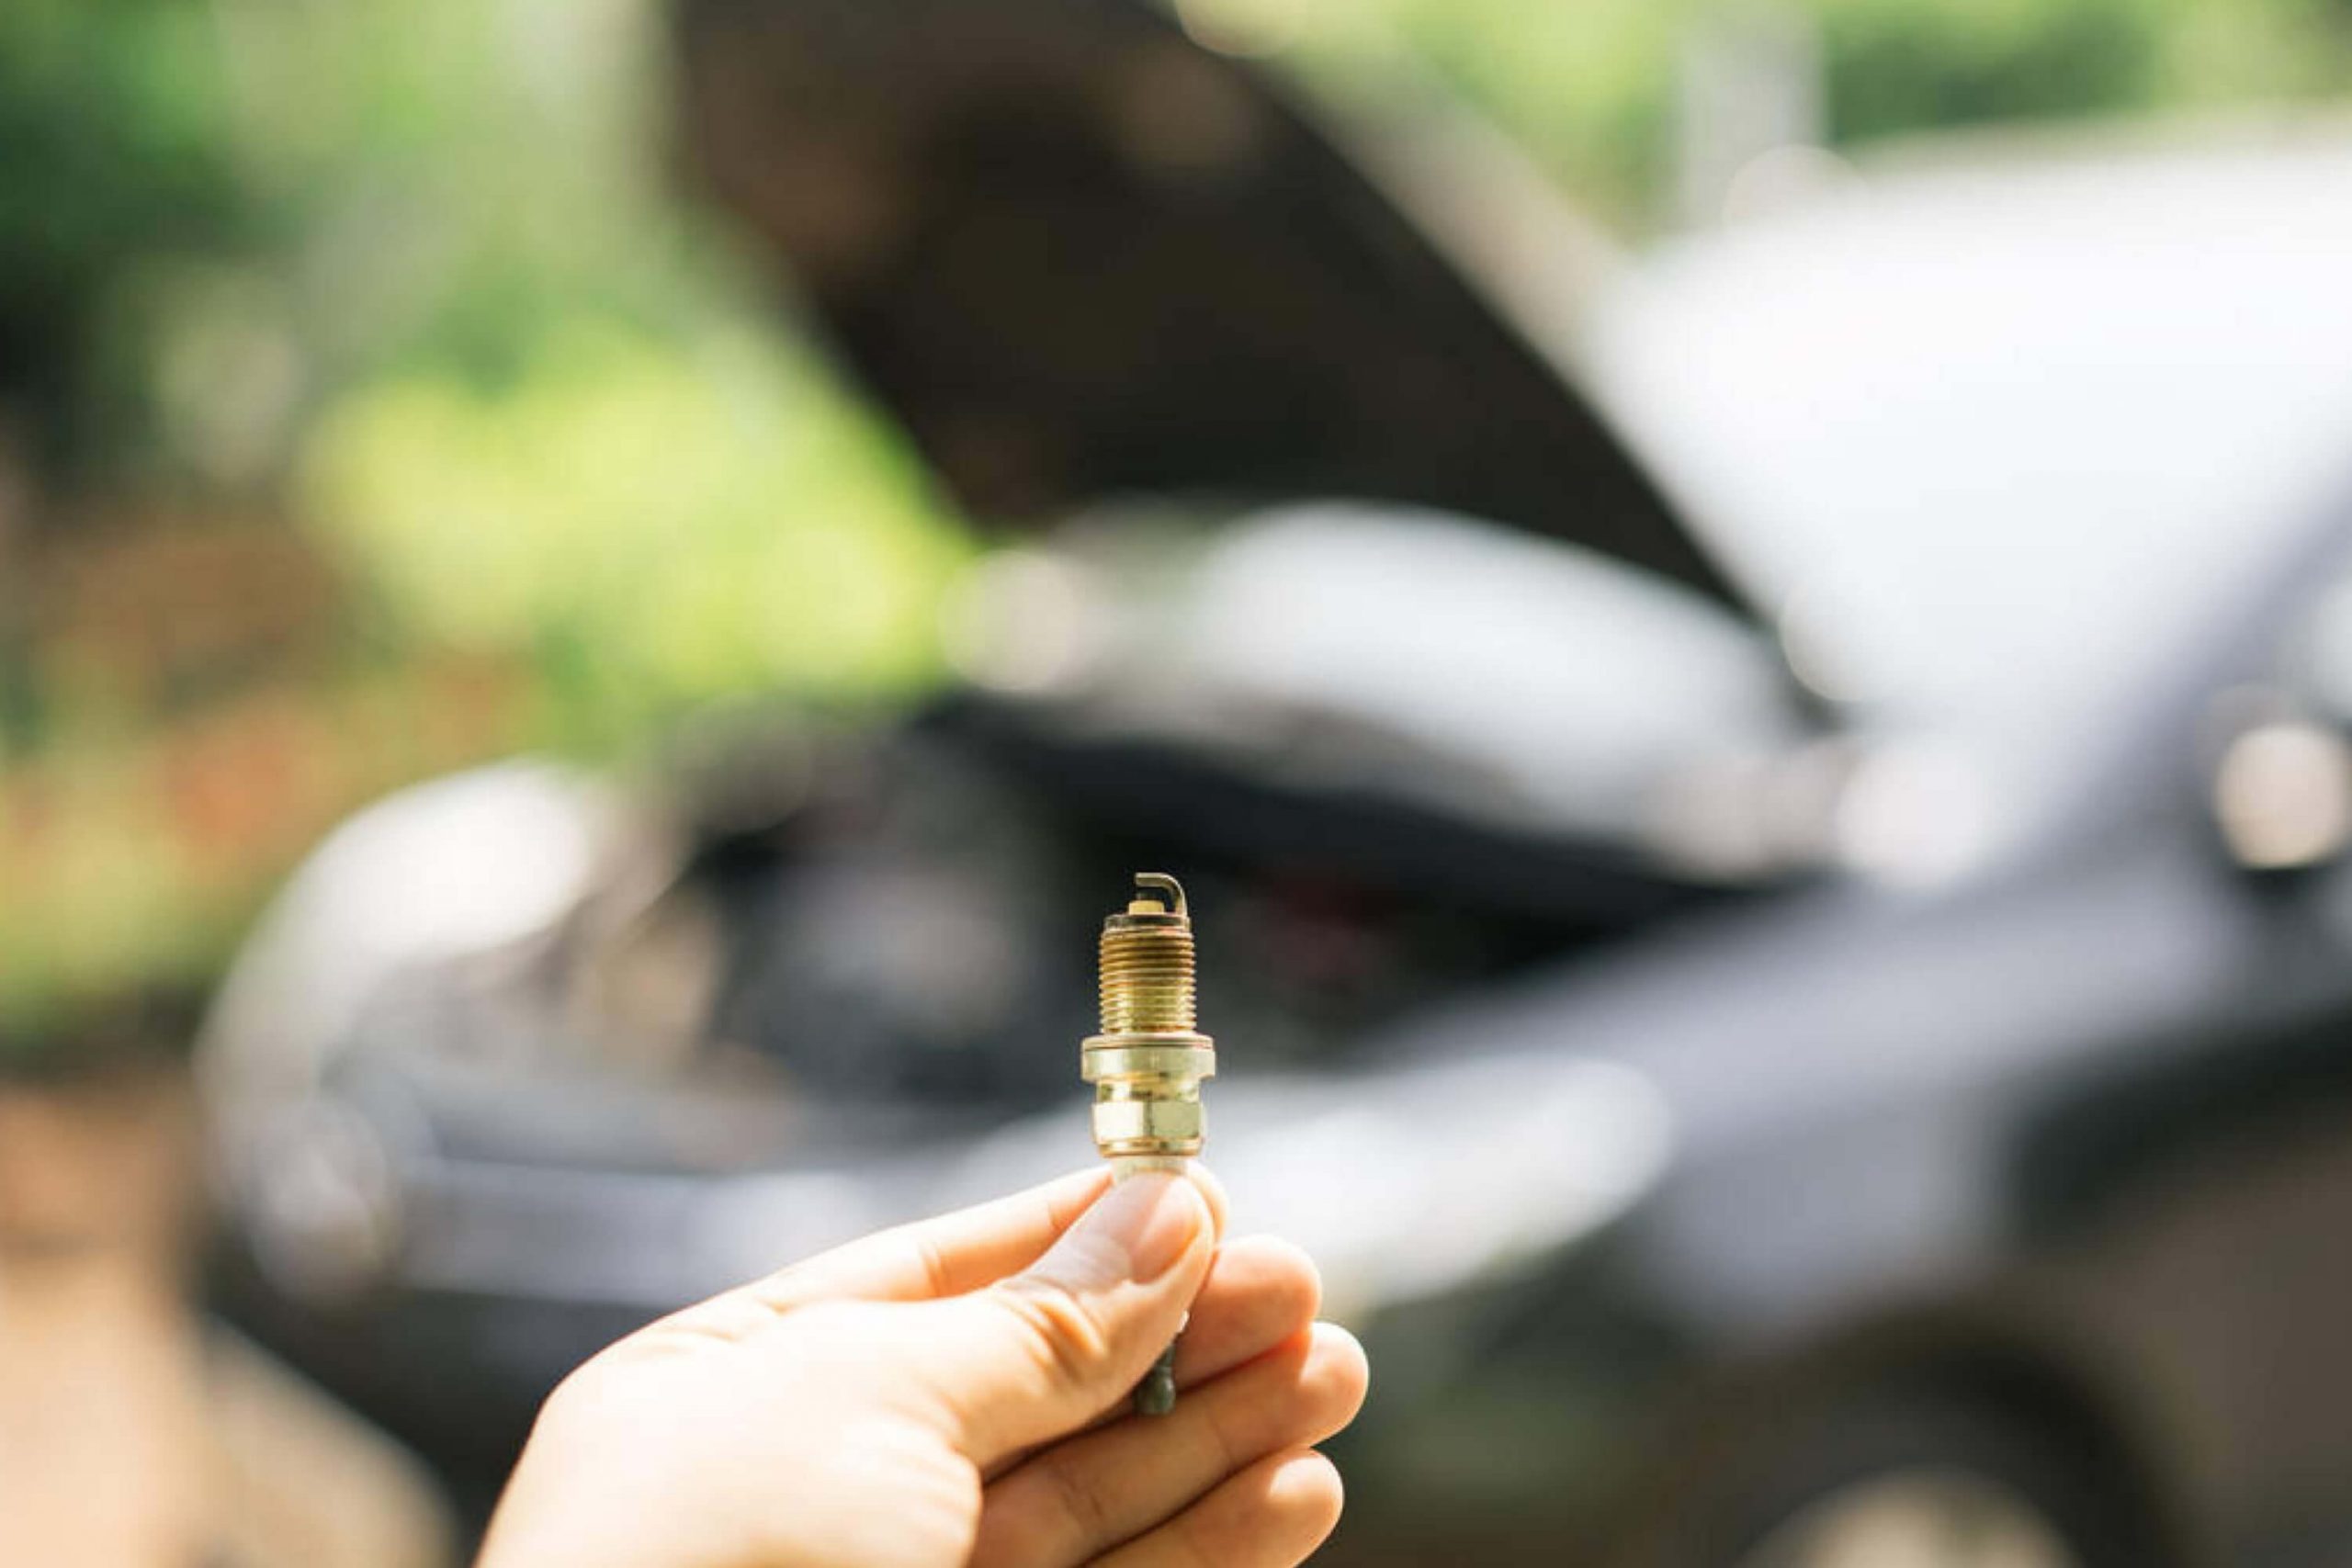 How To Clean A Spark Plug With Sandpaper